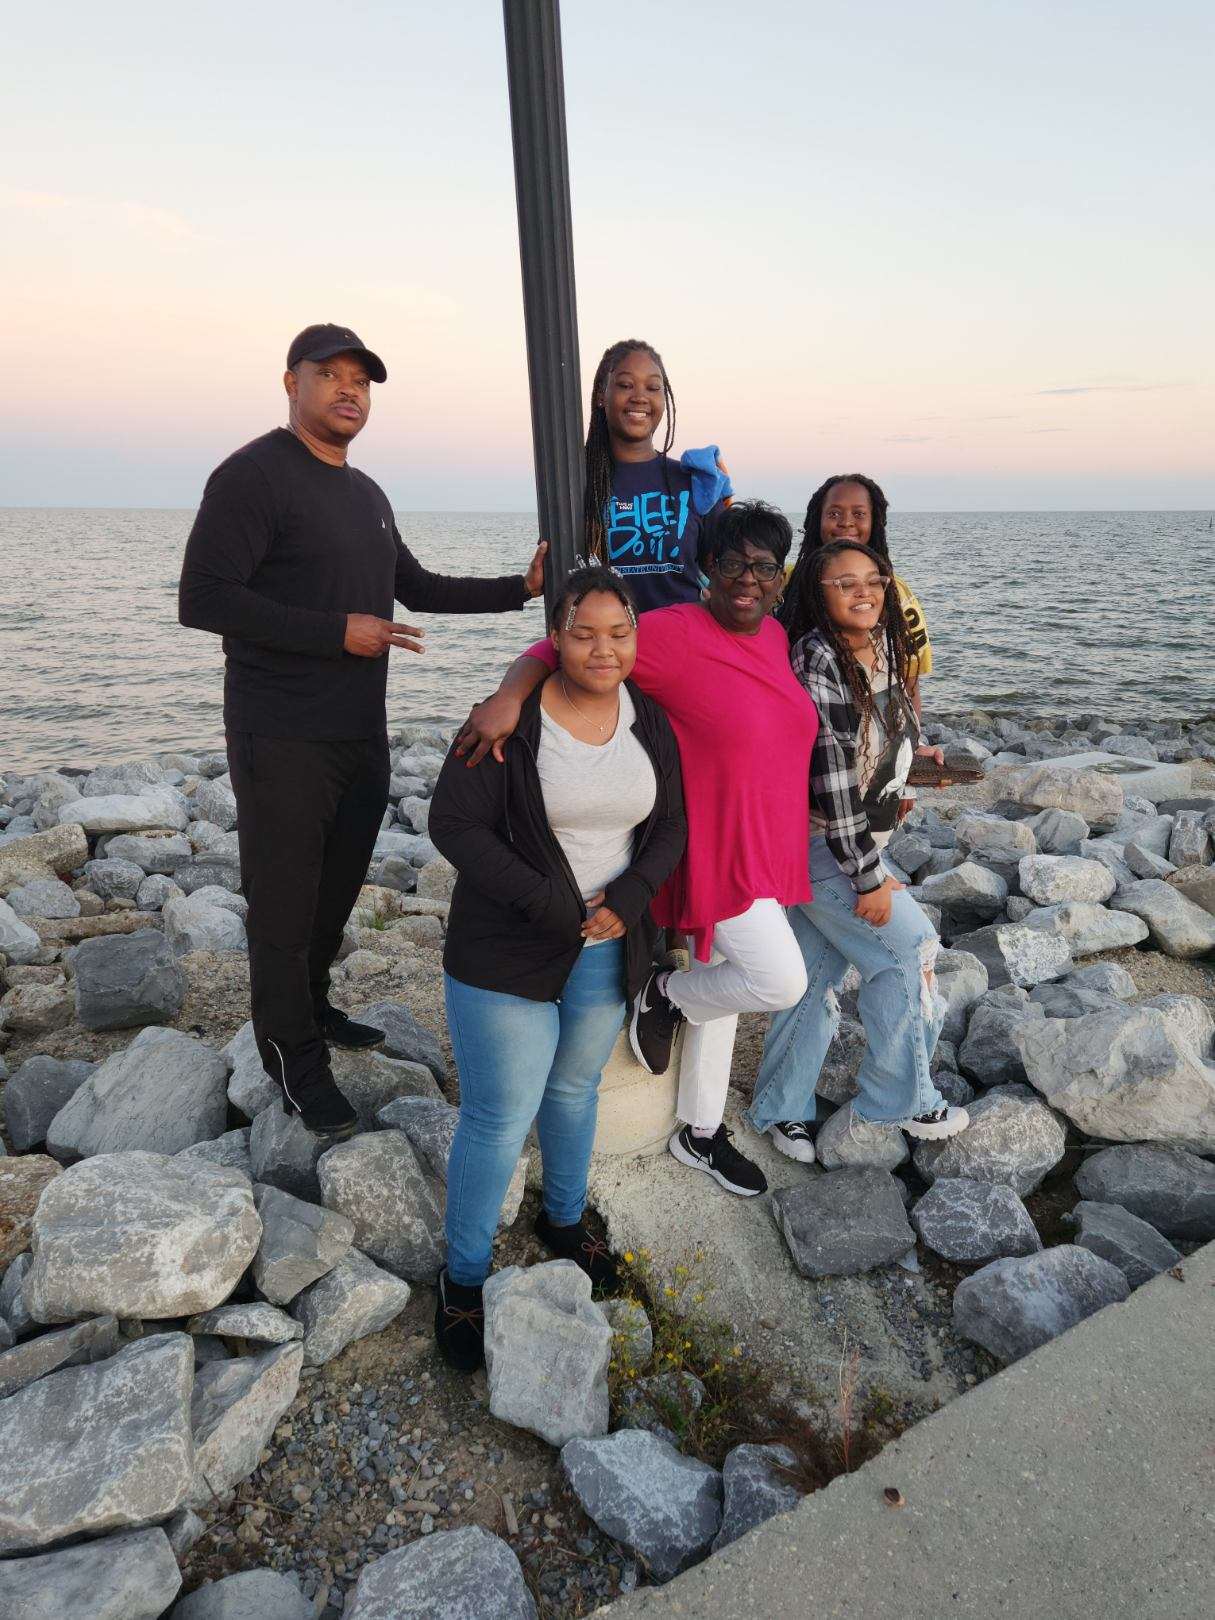 DECA Fall Conference in Gulfport, MS